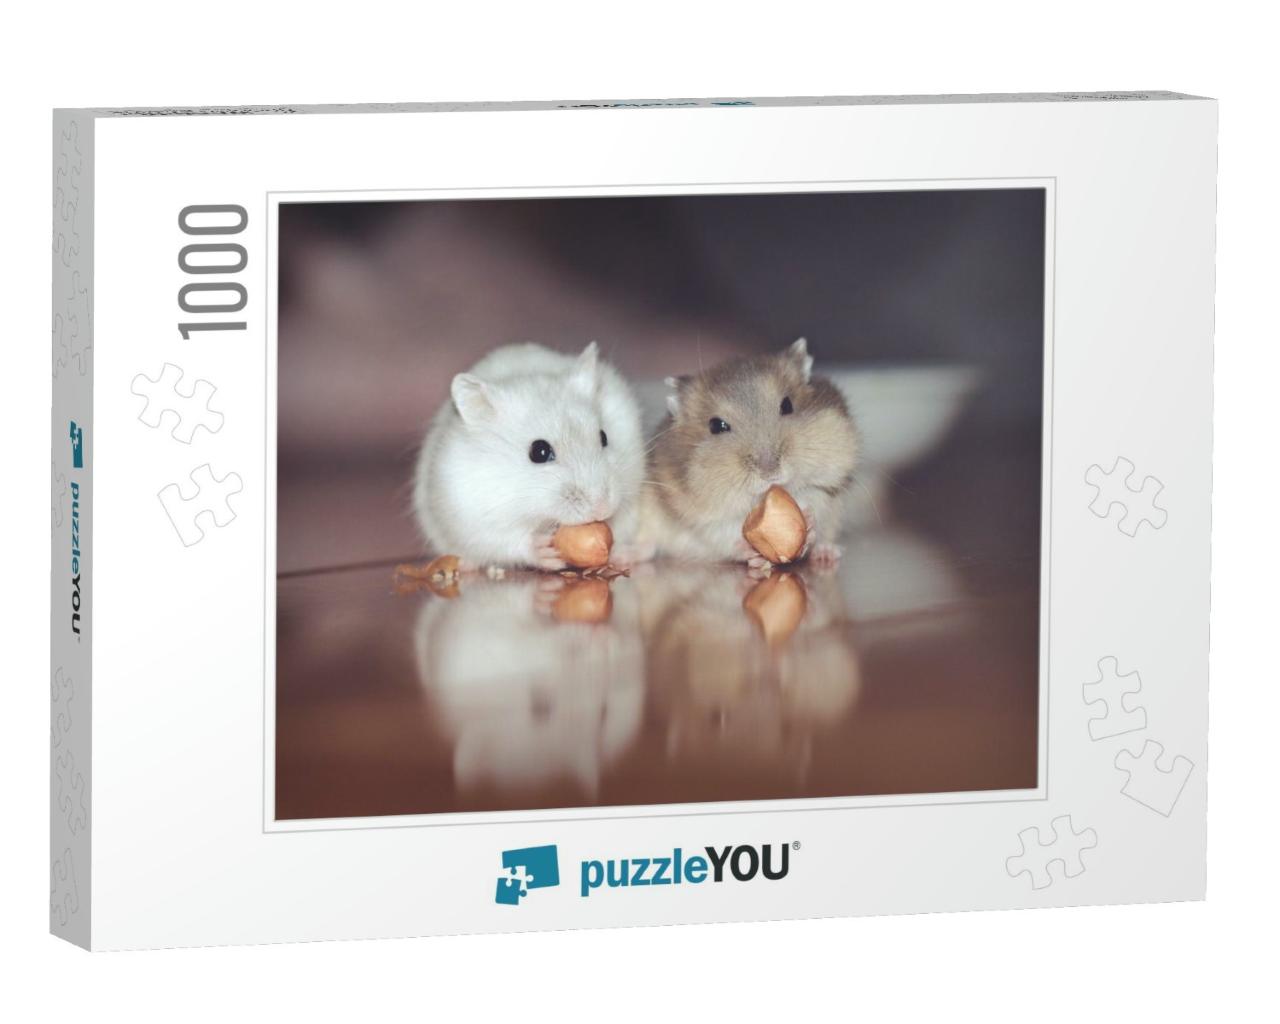 Cute Little Lovely Russian Dwarf Hamster Couple Very in L... Jigsaw Puzzle with 1000 pieces